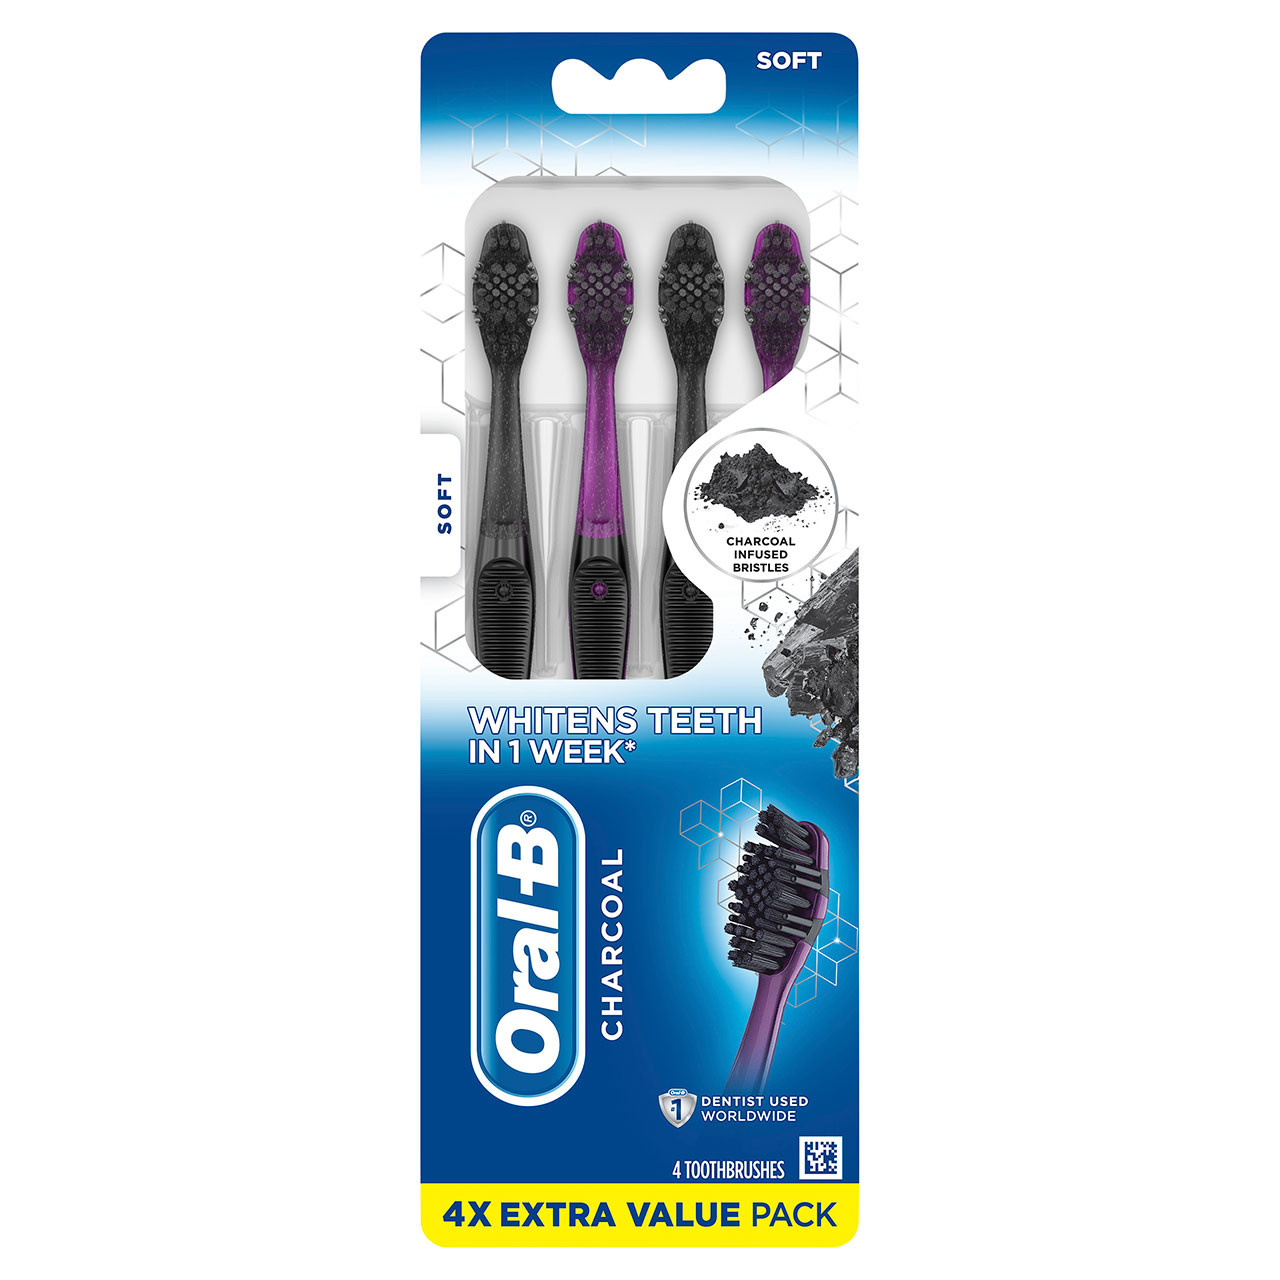 CEPILLO DENTAL ORAL B CHARCOAL PACK X4 UNID